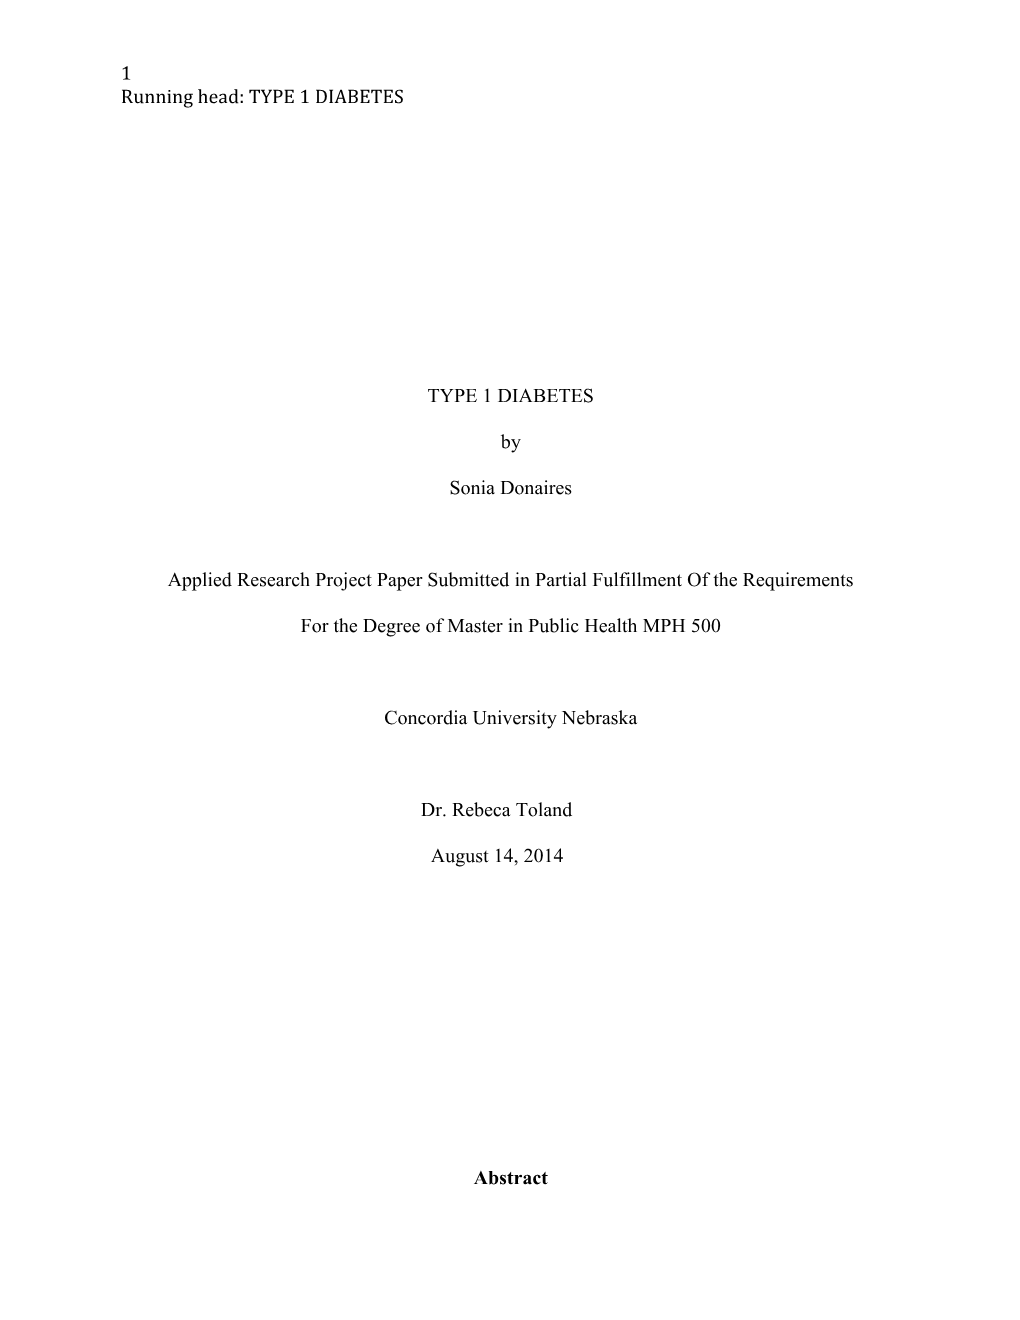 Applied Research Project Paper Submitted in Partial Fulfillment of the Requirements